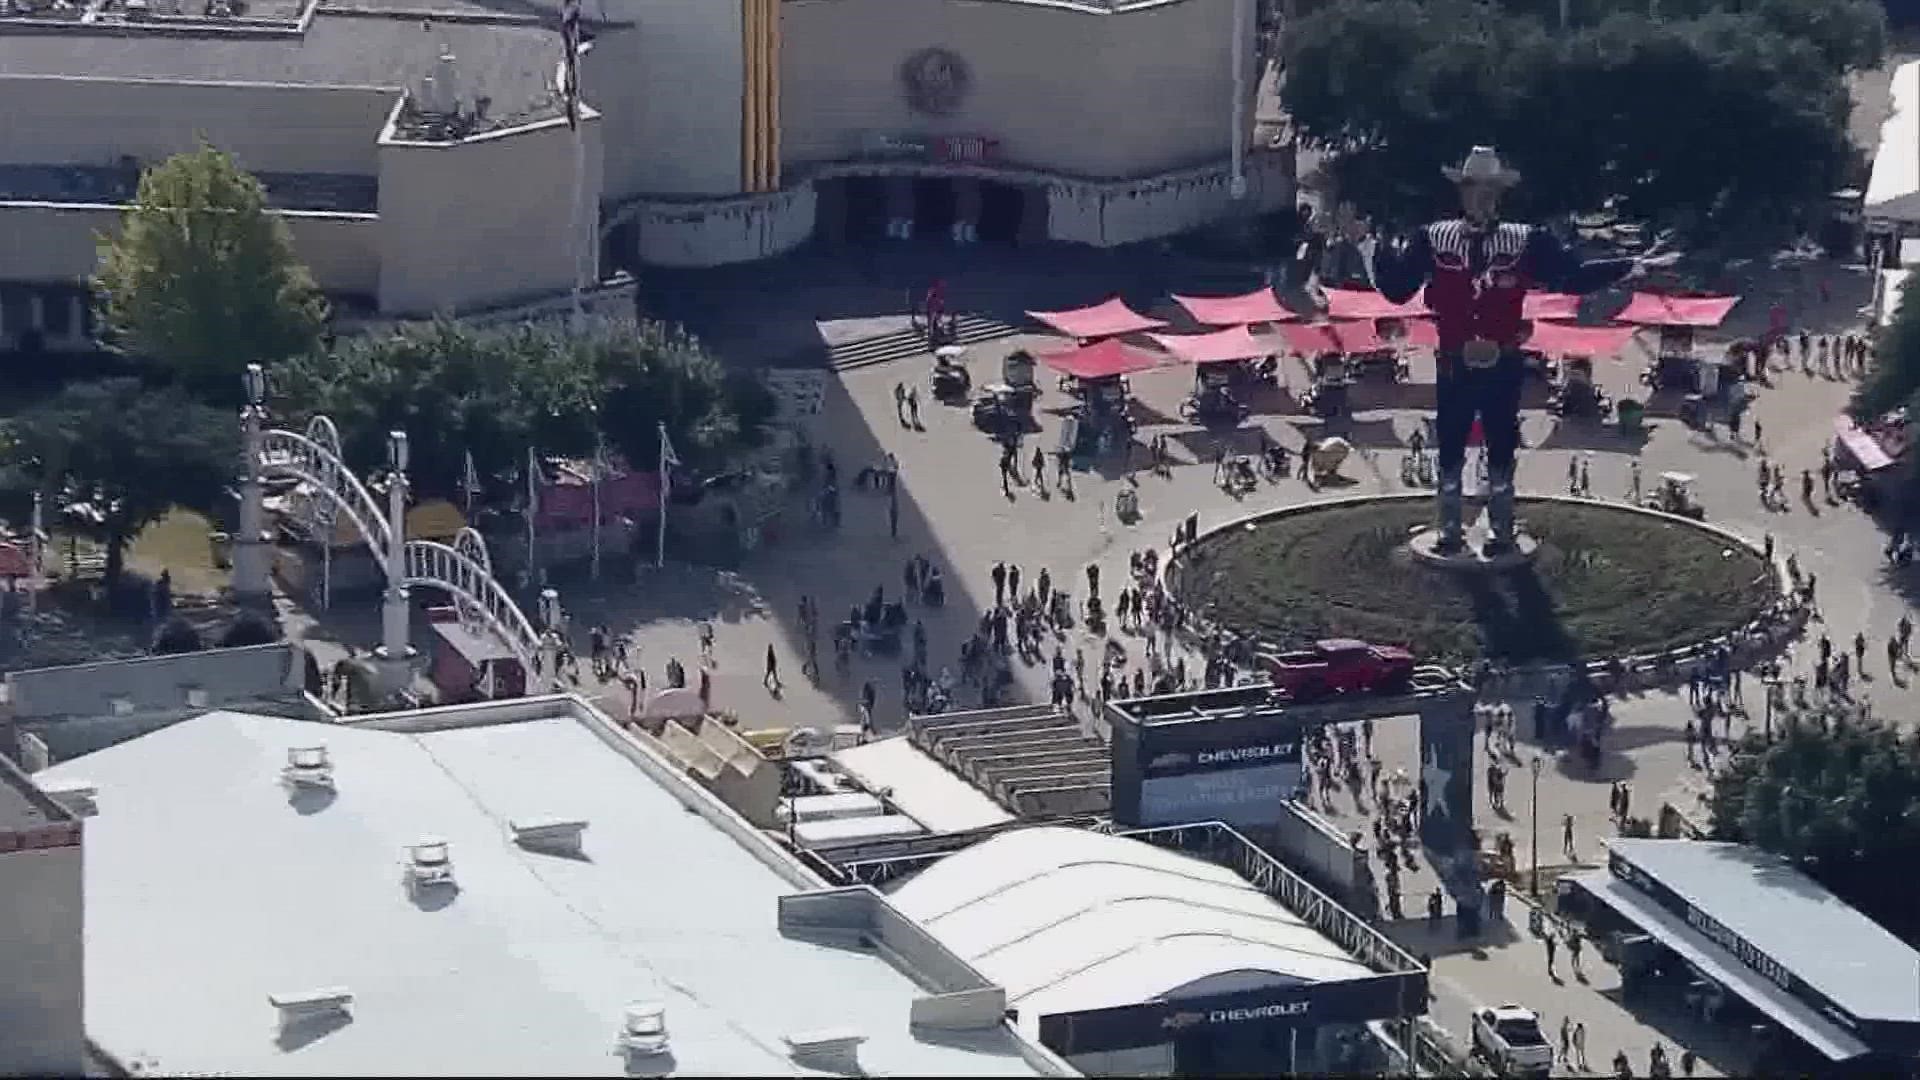 We crunched the numbers and found the cheapest ways to get the State Fair this year.